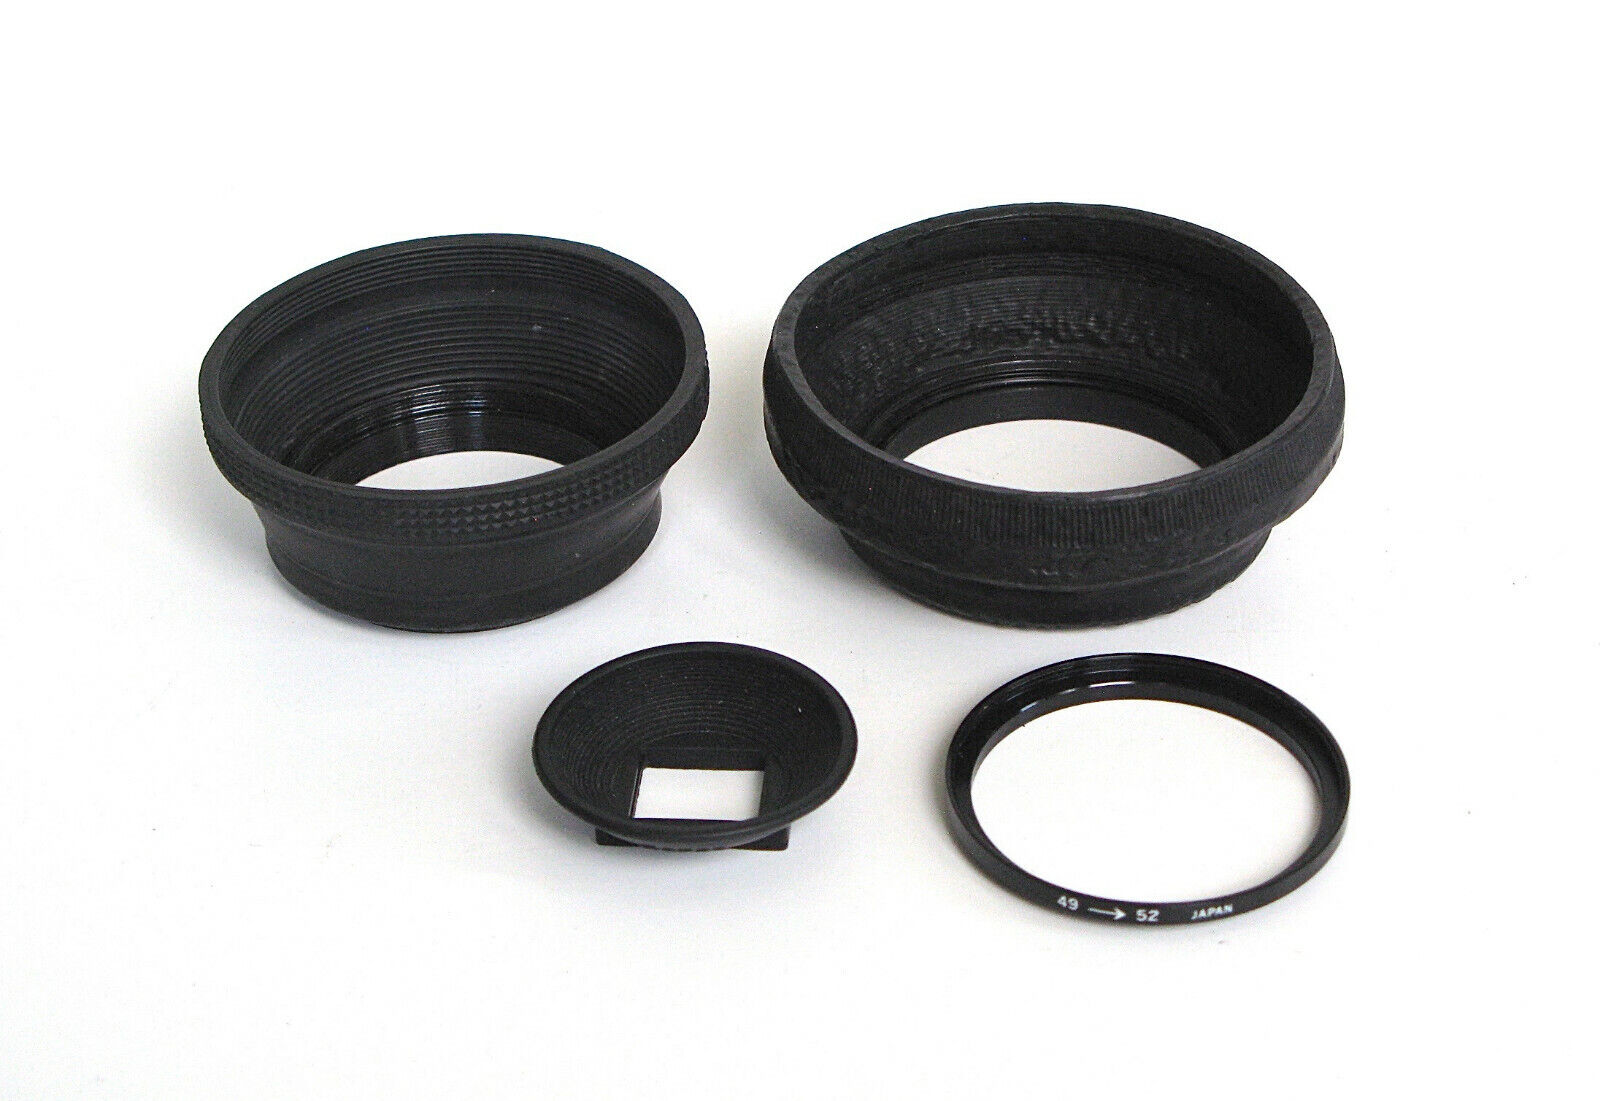 Canon 35mm Camera Eyecup, 49-52 Step-Up Ring, 52mm & 58mm Lens Hoods Canon, Unbranded